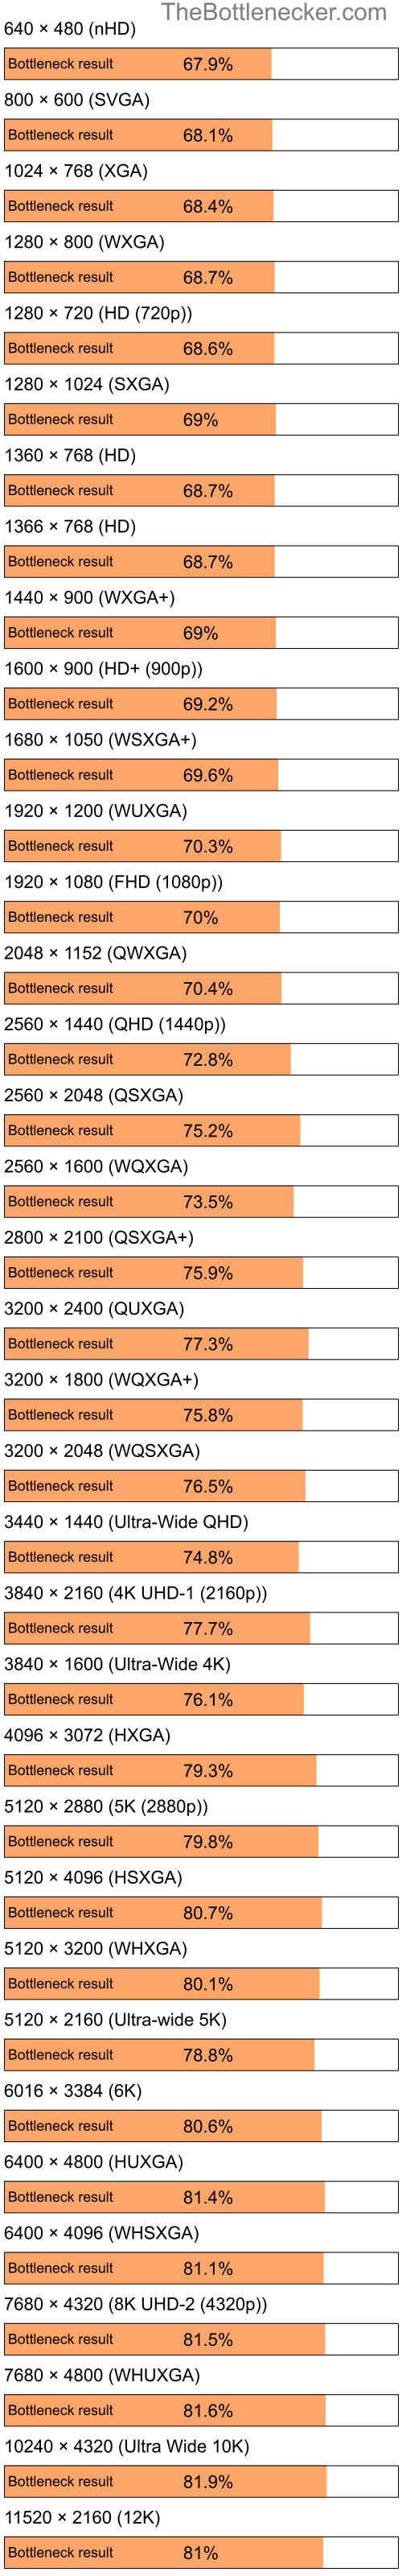 Bottleneck results by resolution for Intel Celeron and AMD Radeon HD 4200 in Graphic Card Intense Tasks